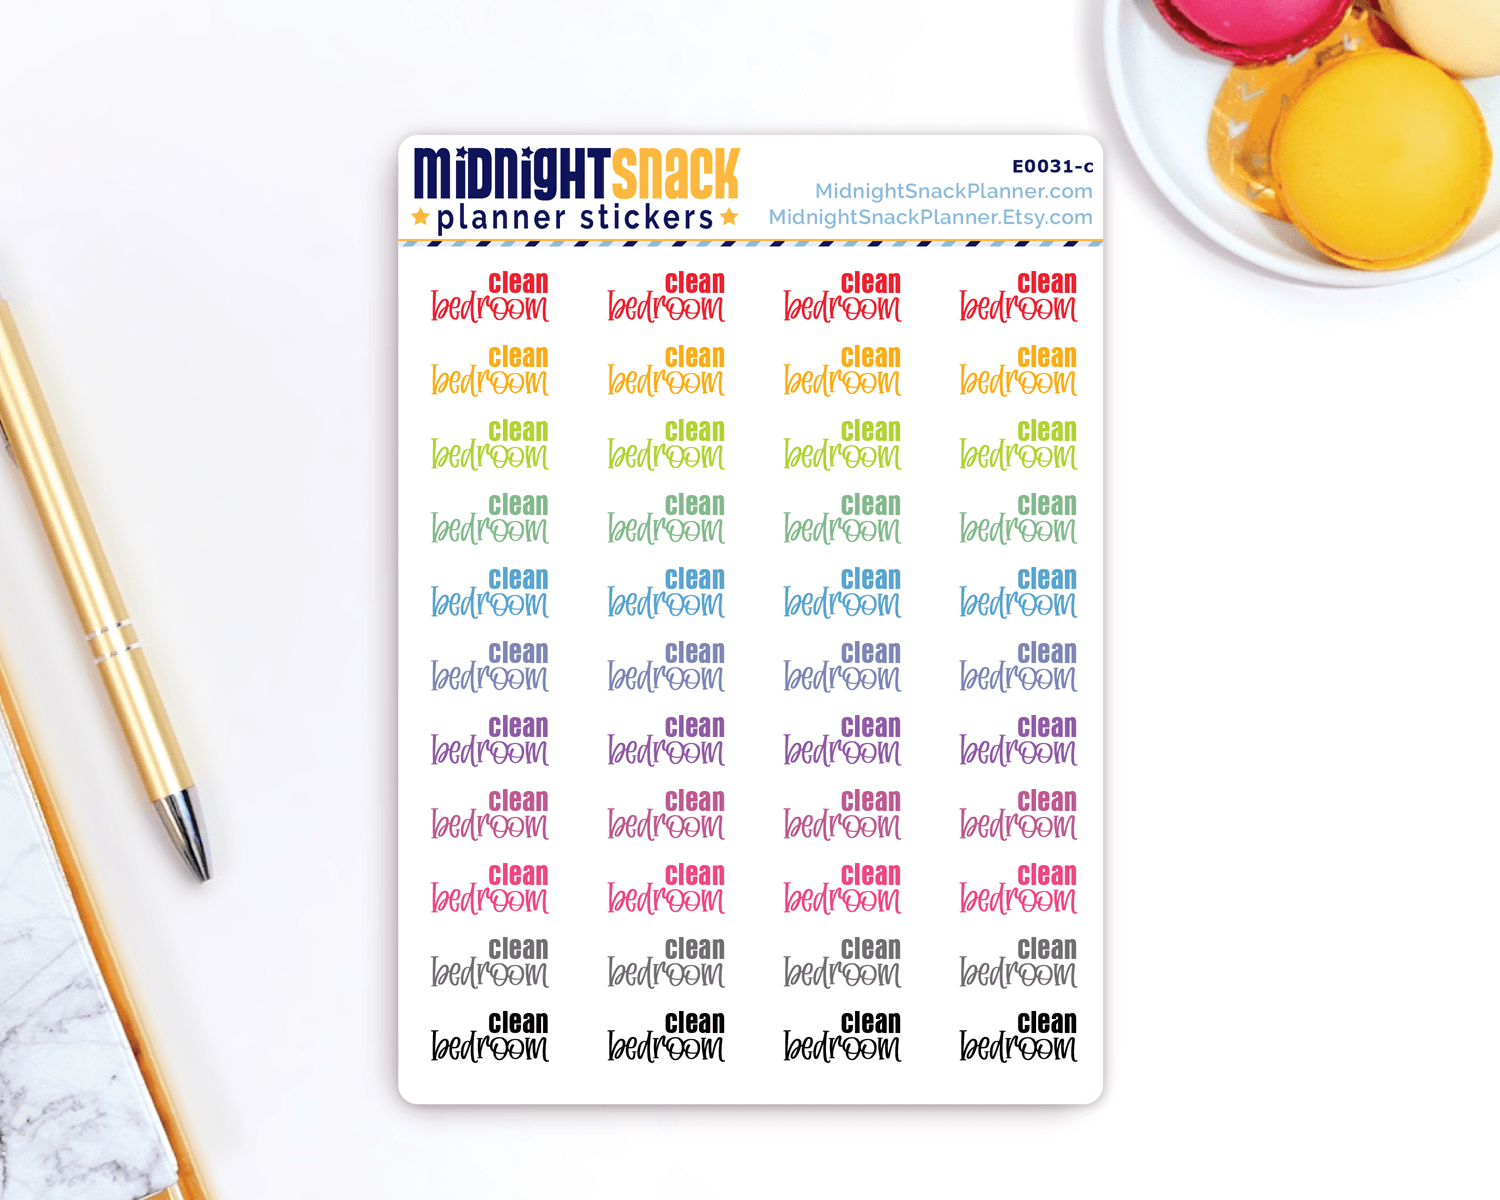 Clean Bedroom Script Planner Stickers: Household Chores Reminder